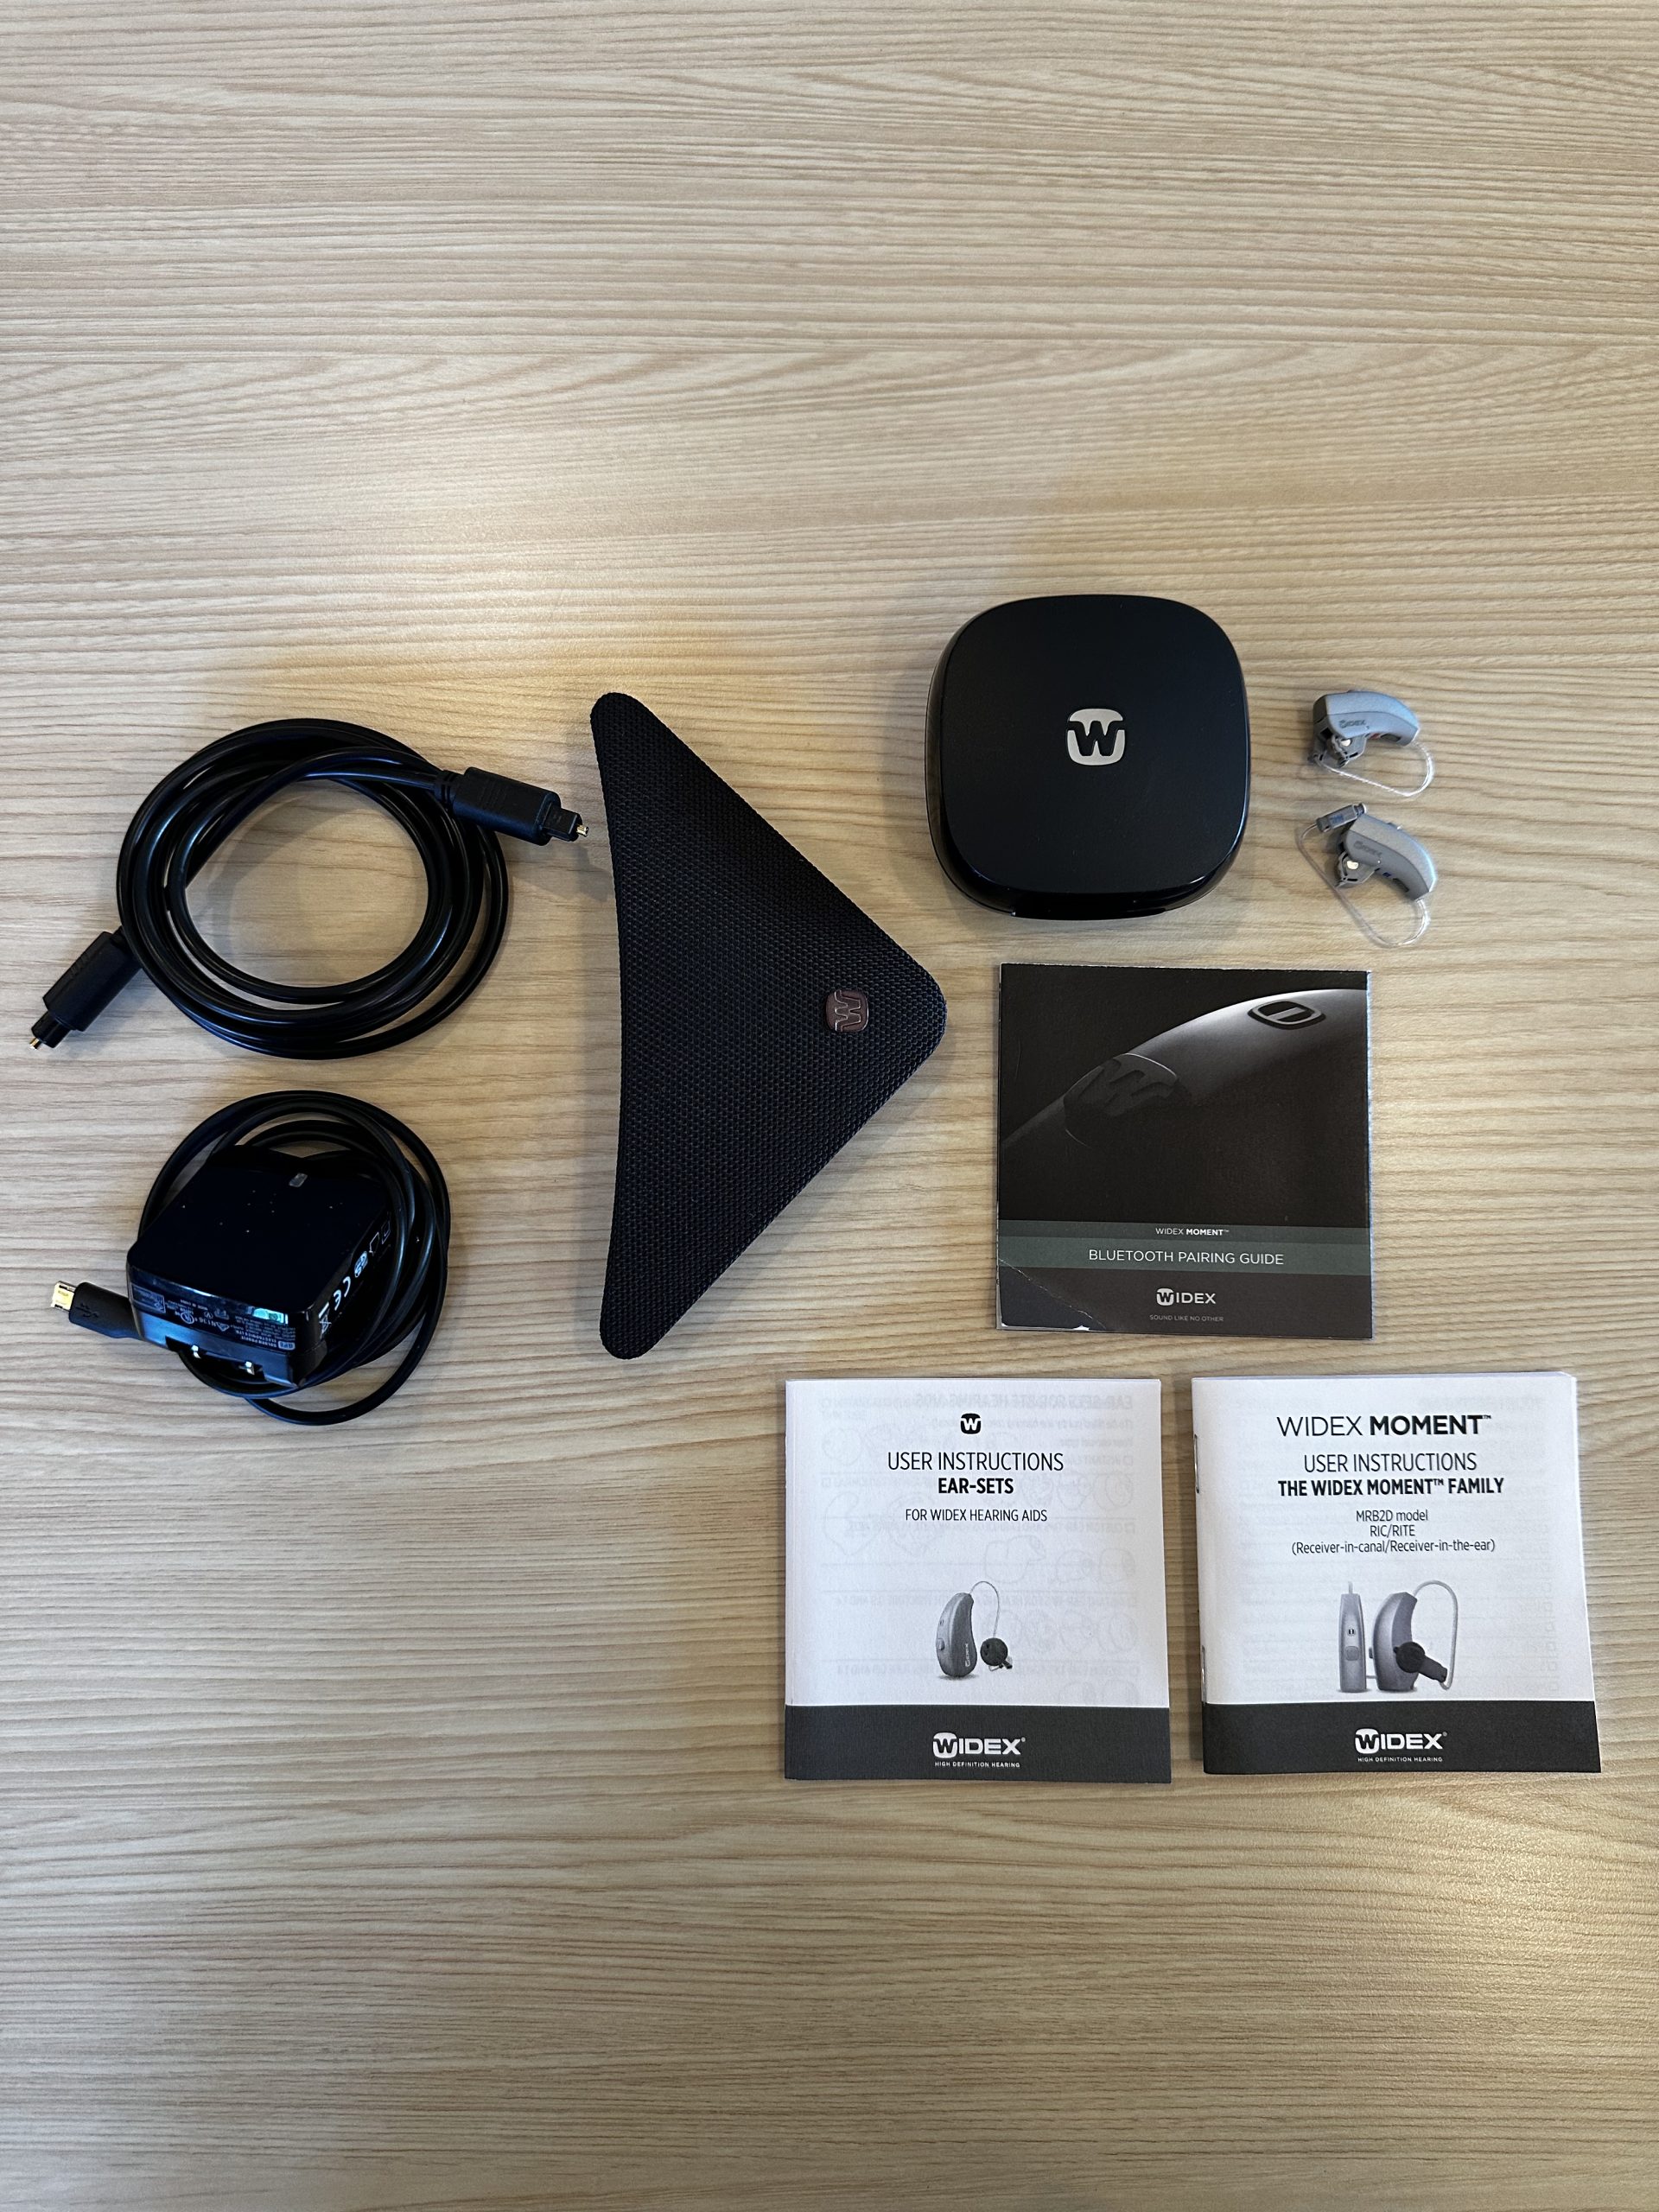 used widex moment hearing aids with tv play and supplies